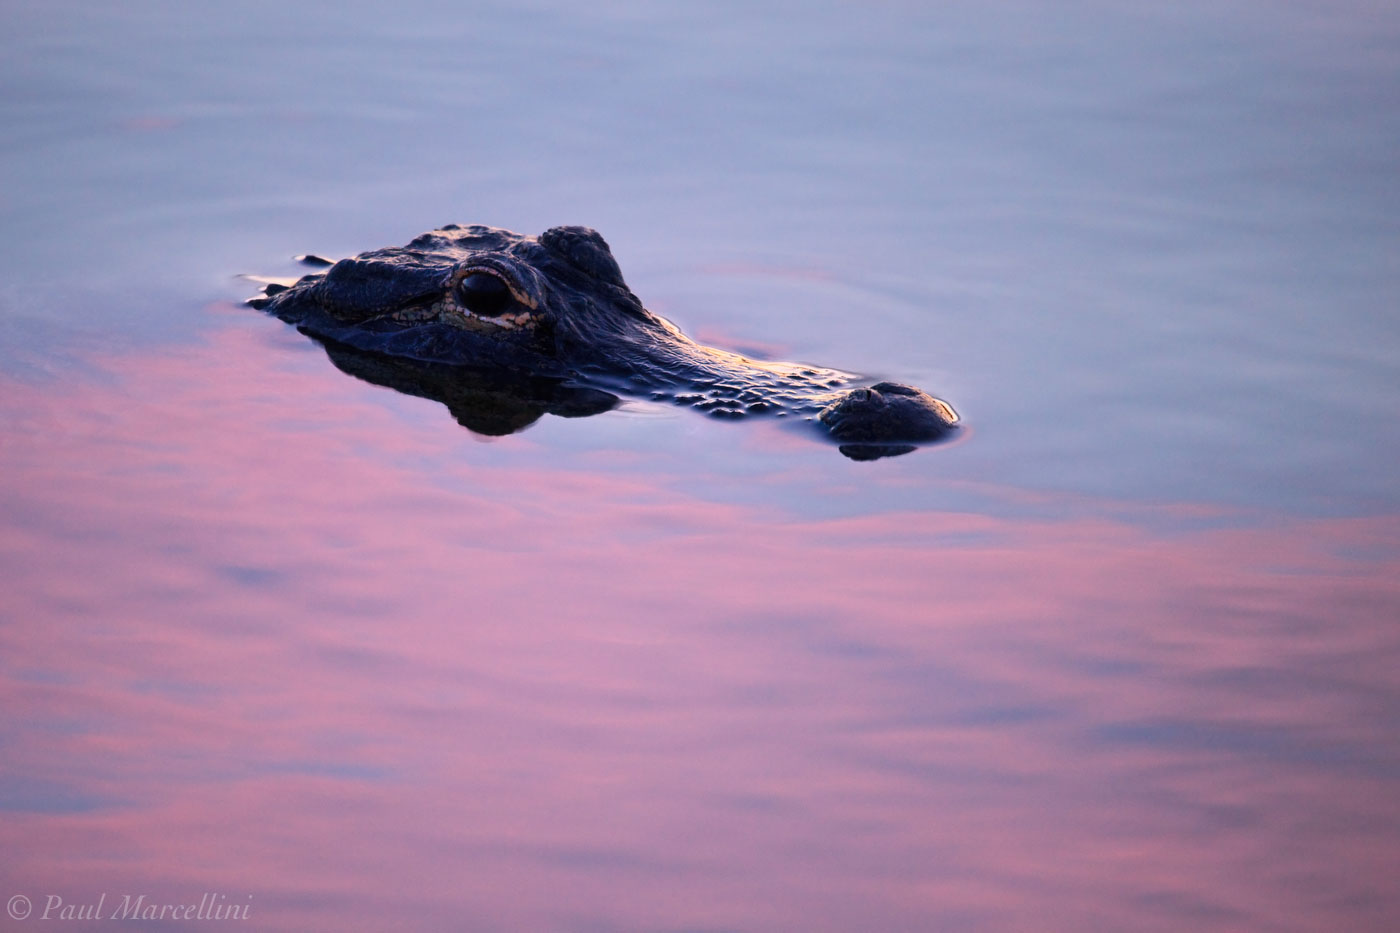 An Alligator comes up for a look in the soft colors of sunset.